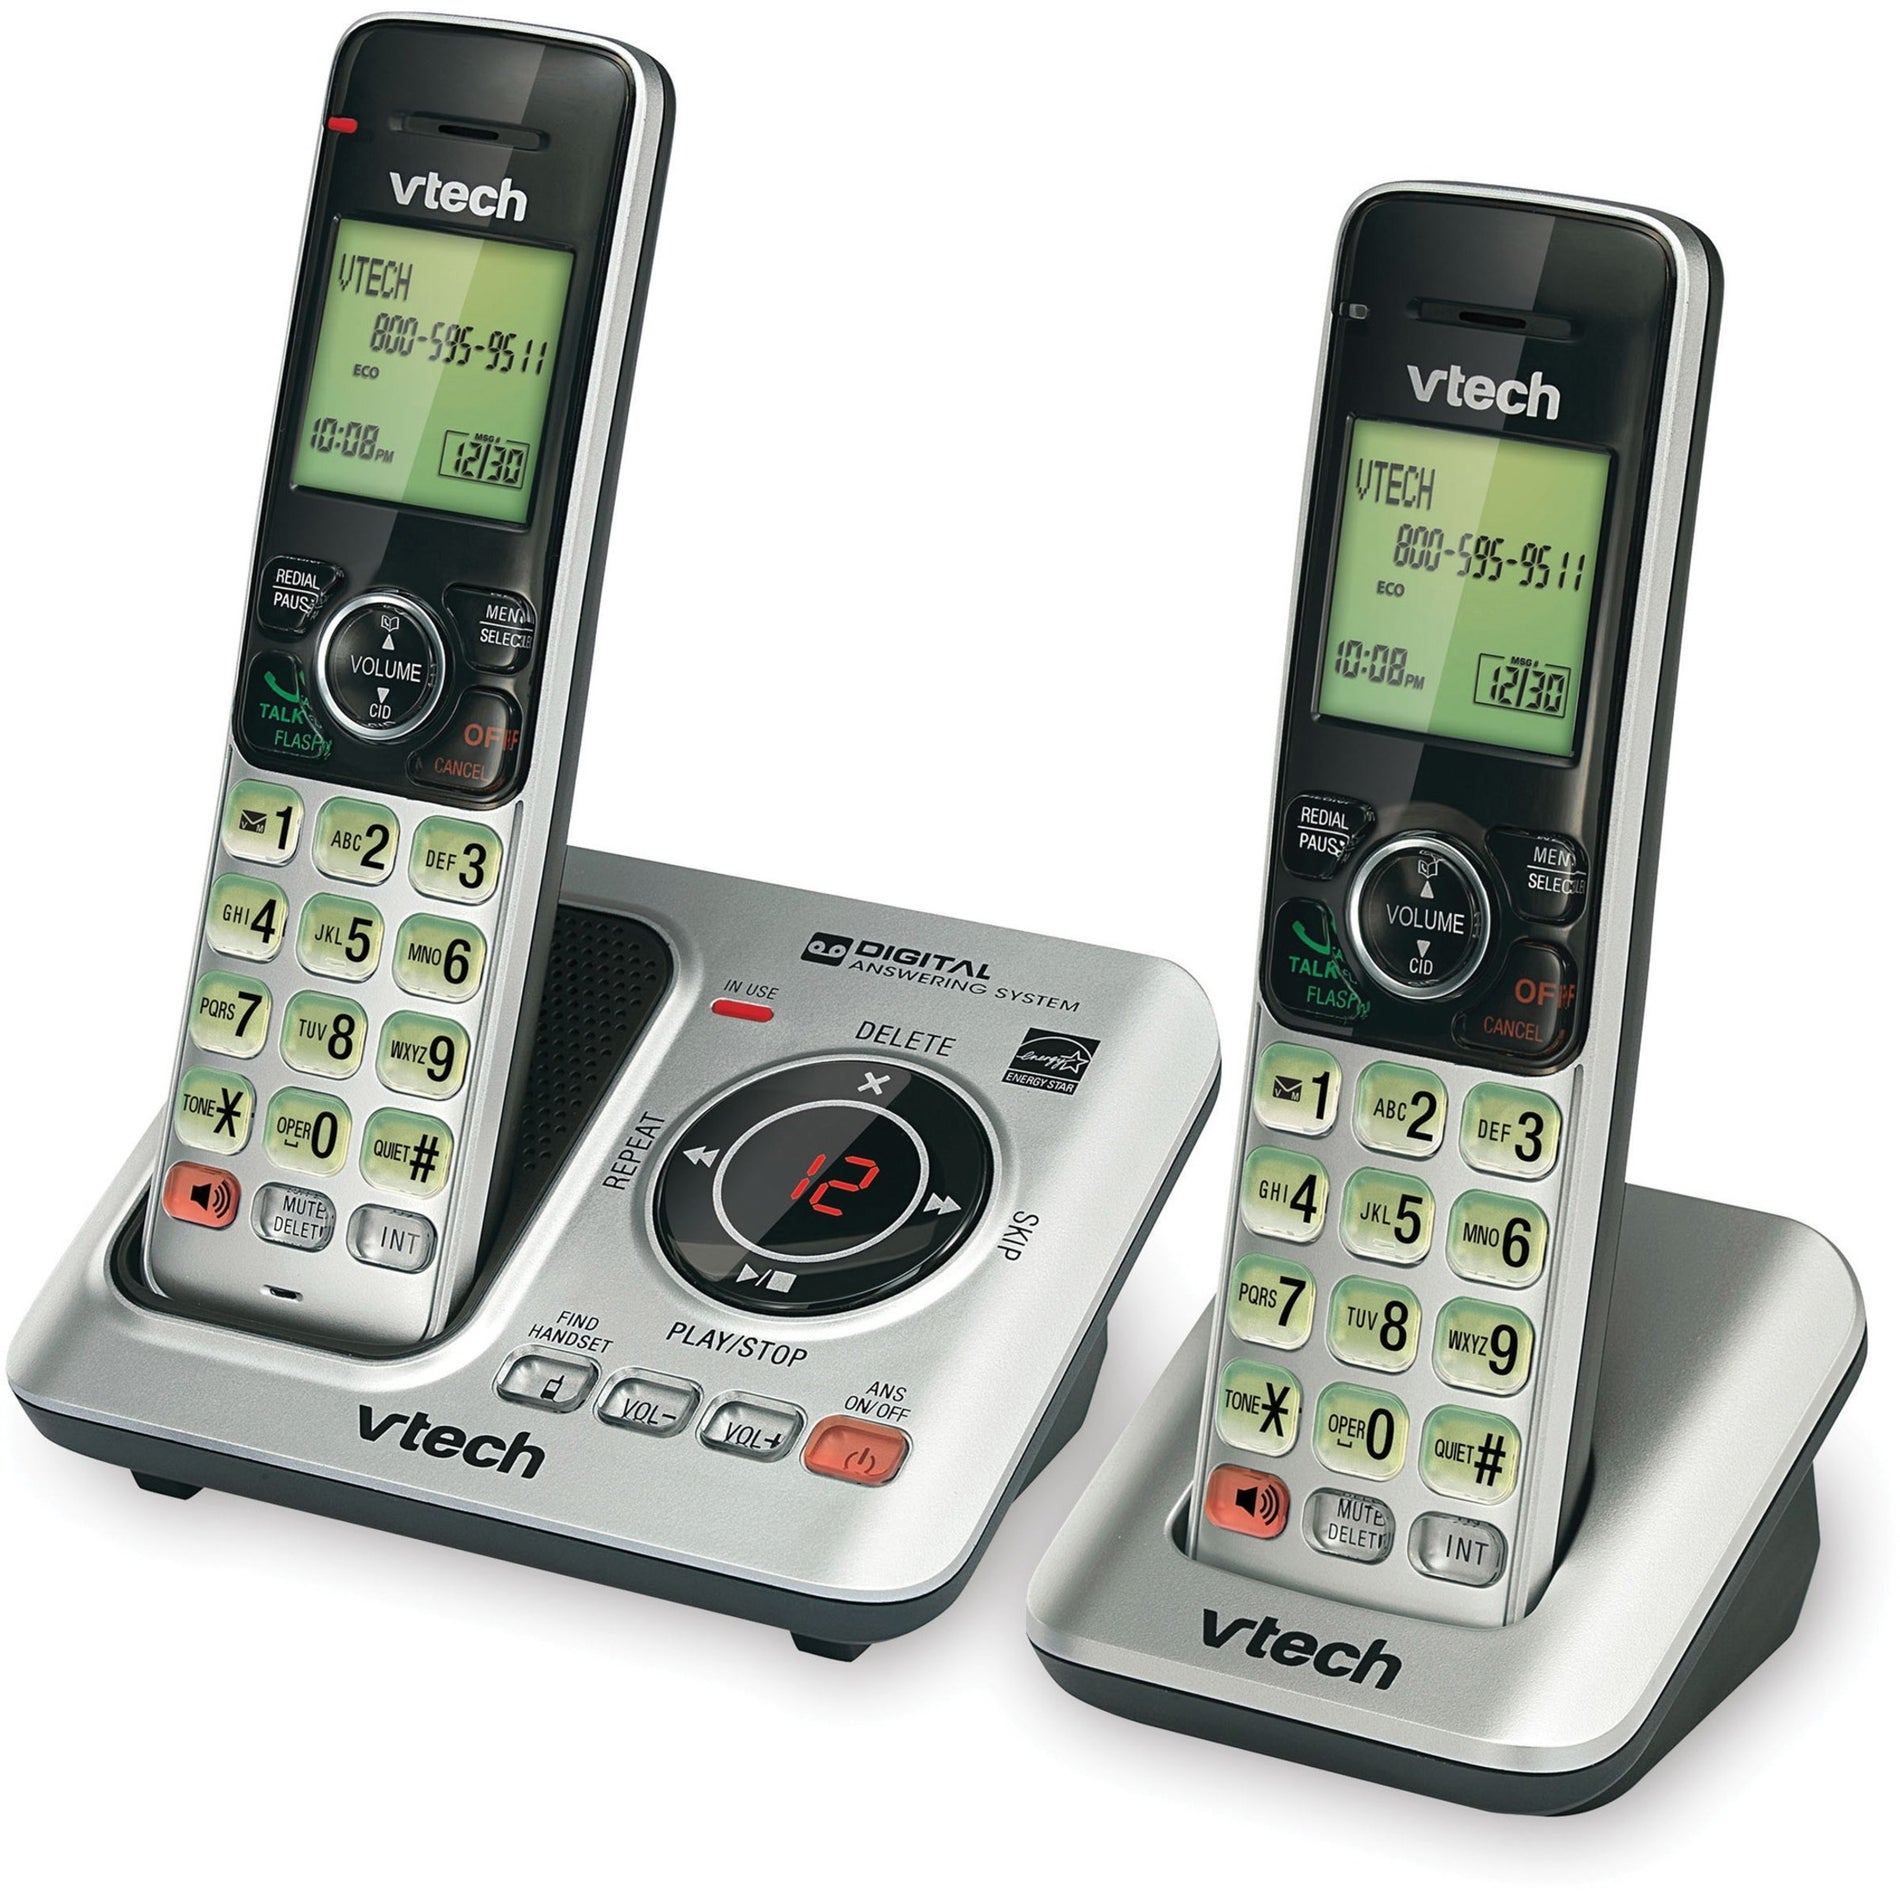 VTech CS6629-2 DECT 6.0 Cordless Phone 2 Handset Answering System with Caller ID/Call Waiting, Expandable, Silent Mode